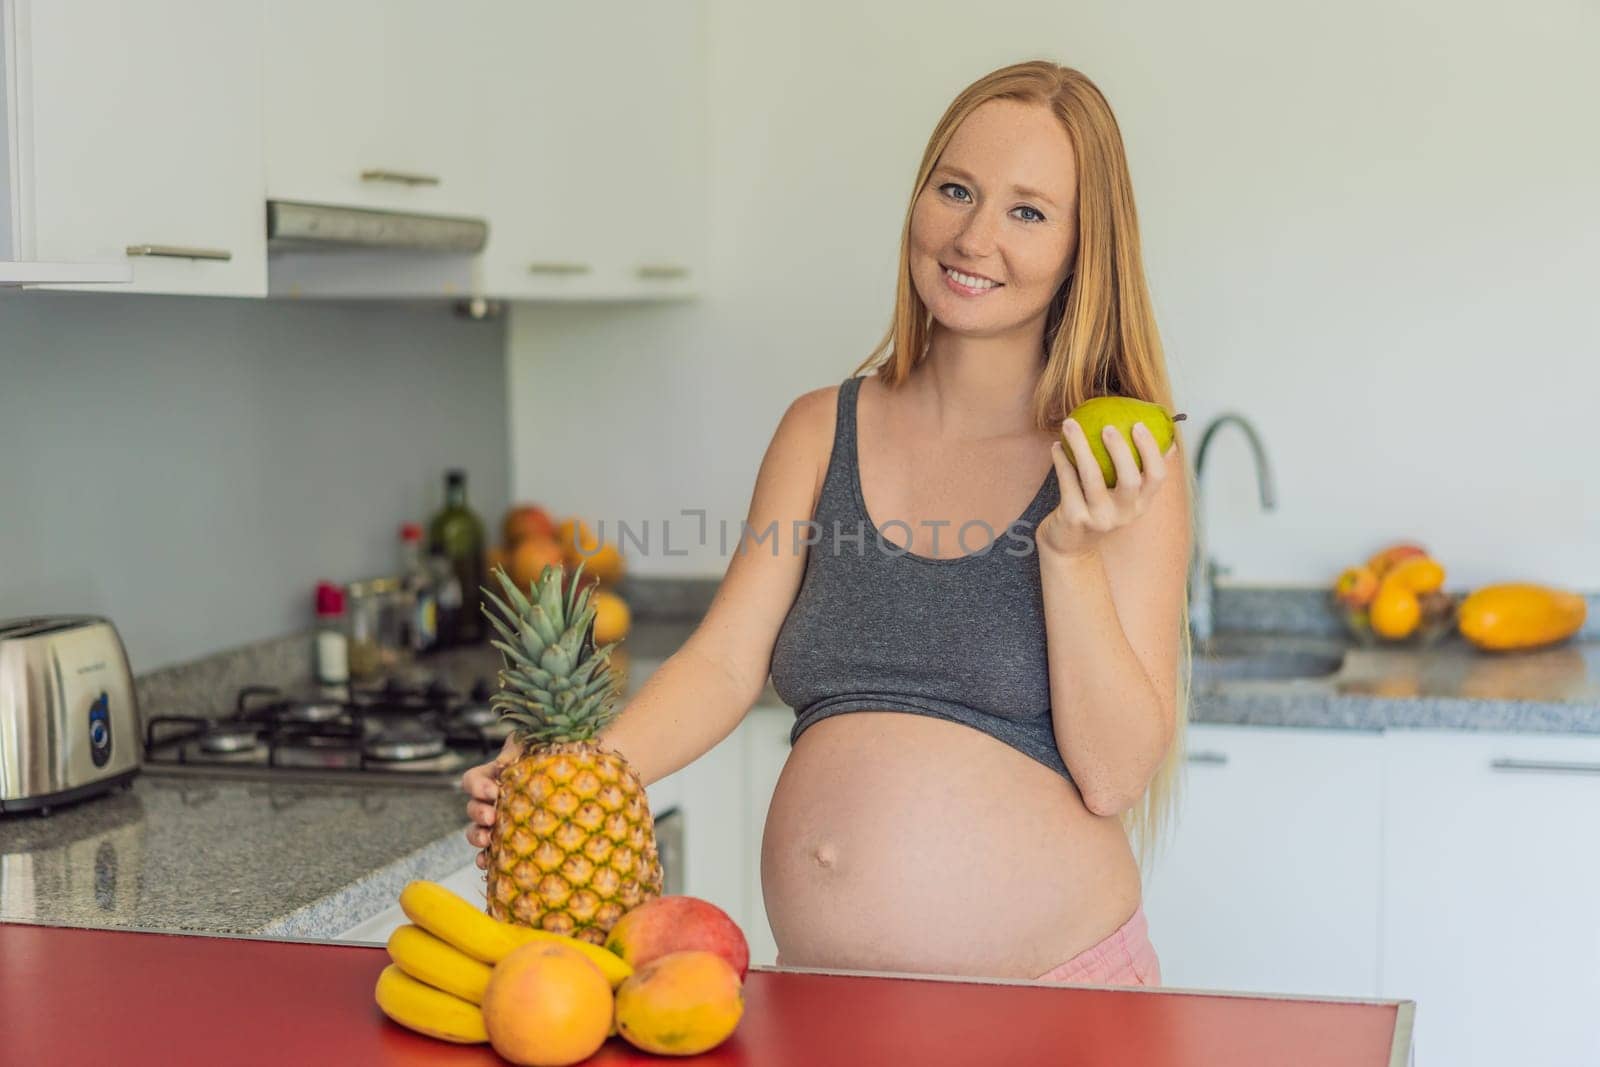 Embracing a healthy choice, a pregnant woman prepares to enjoy a nutritious moment, gearing up to eat fresh fruit and nourish herself during her pregnancy by galitskaya